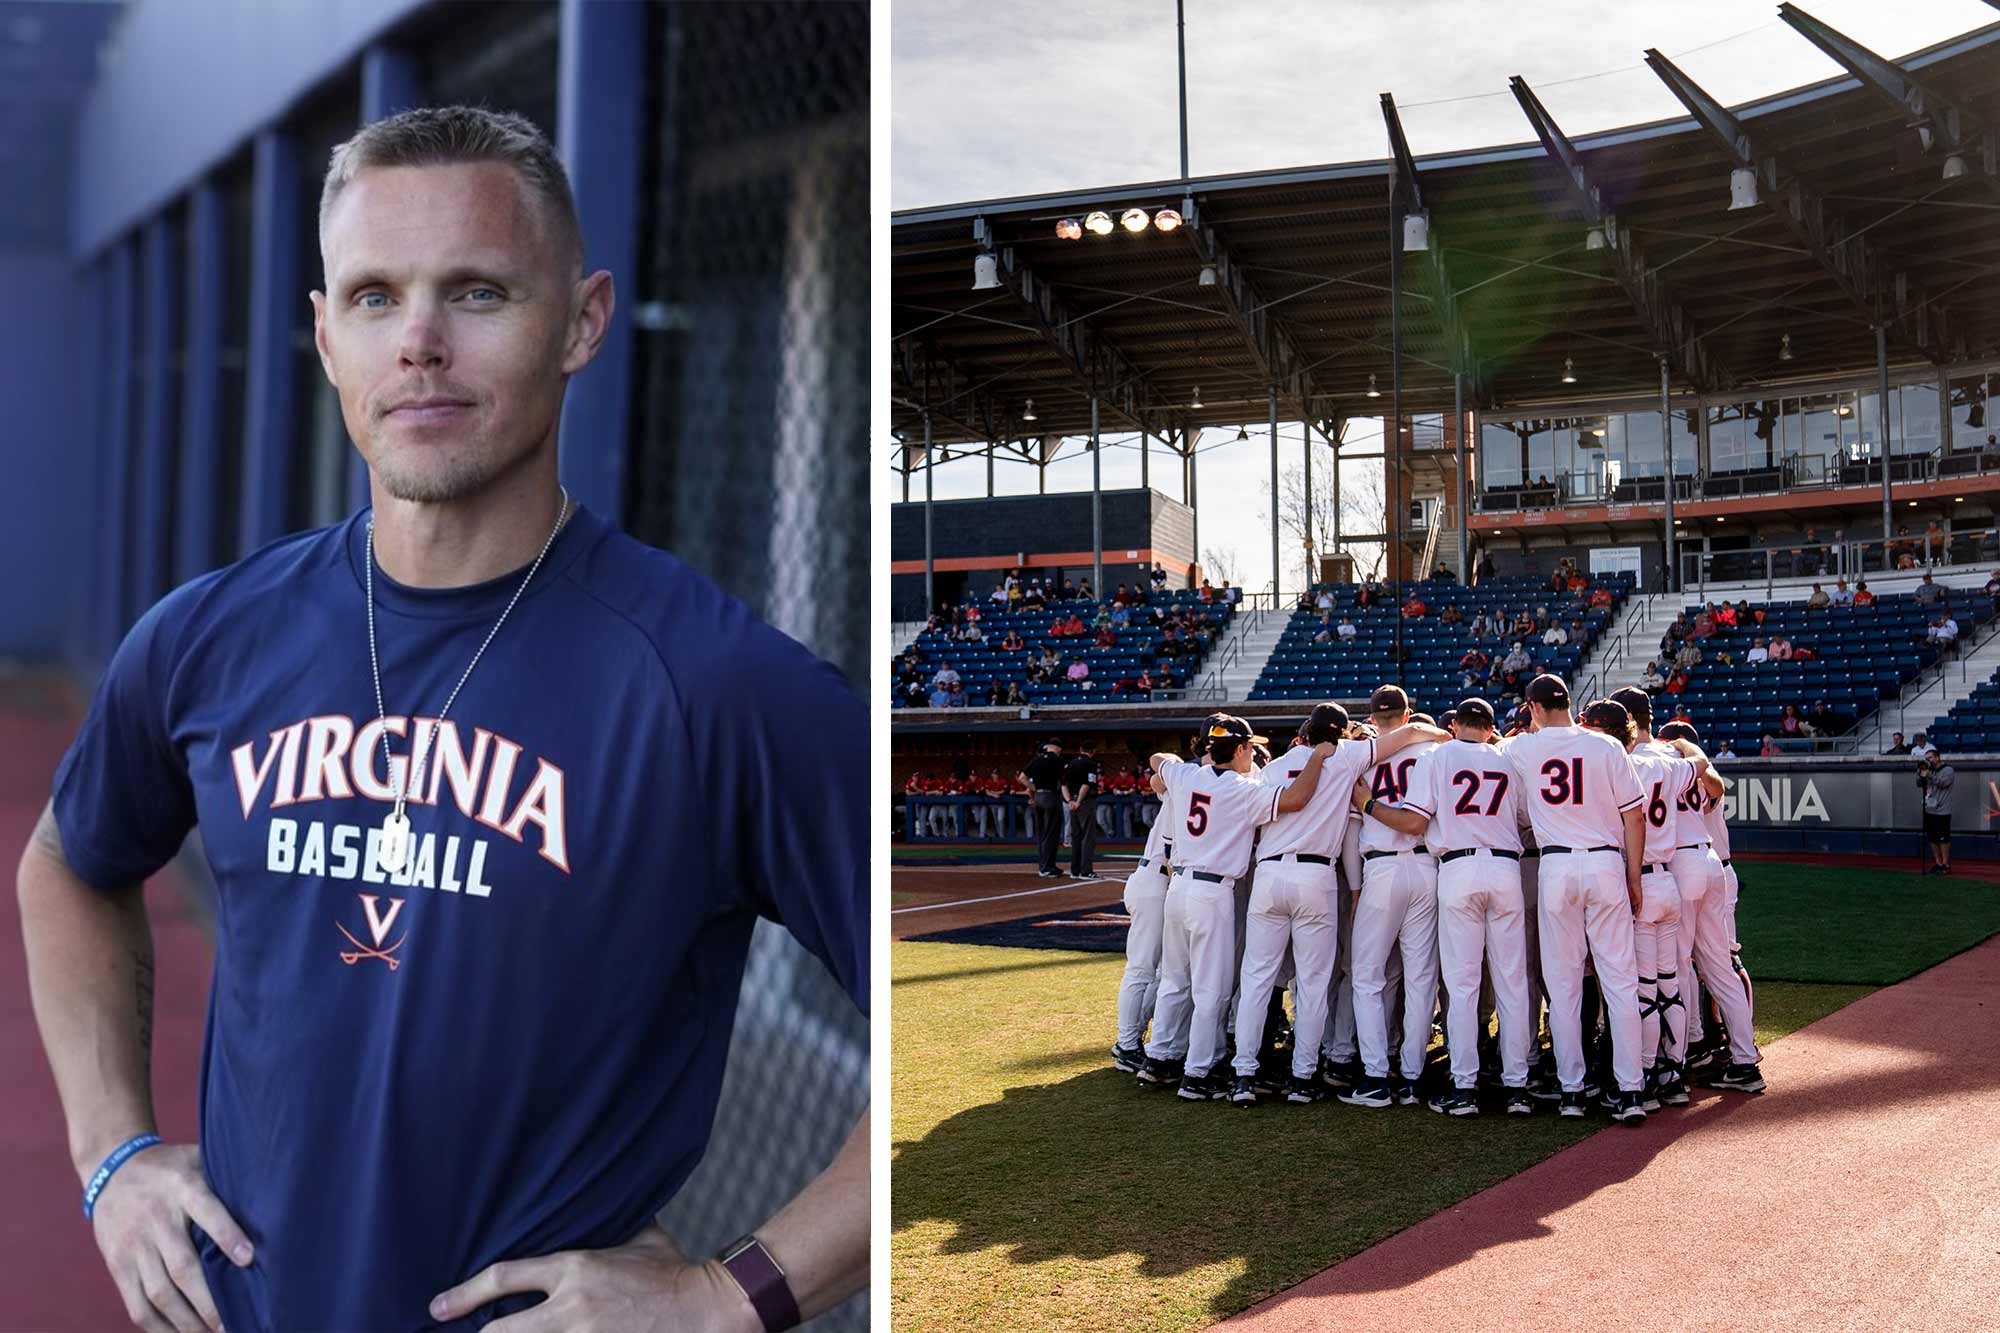 Brandon Guyer, in a Virginia Baseball t-shirt, stands with hands on hips and looks at the camera. At right, Virginia baseball players huddle on the field.